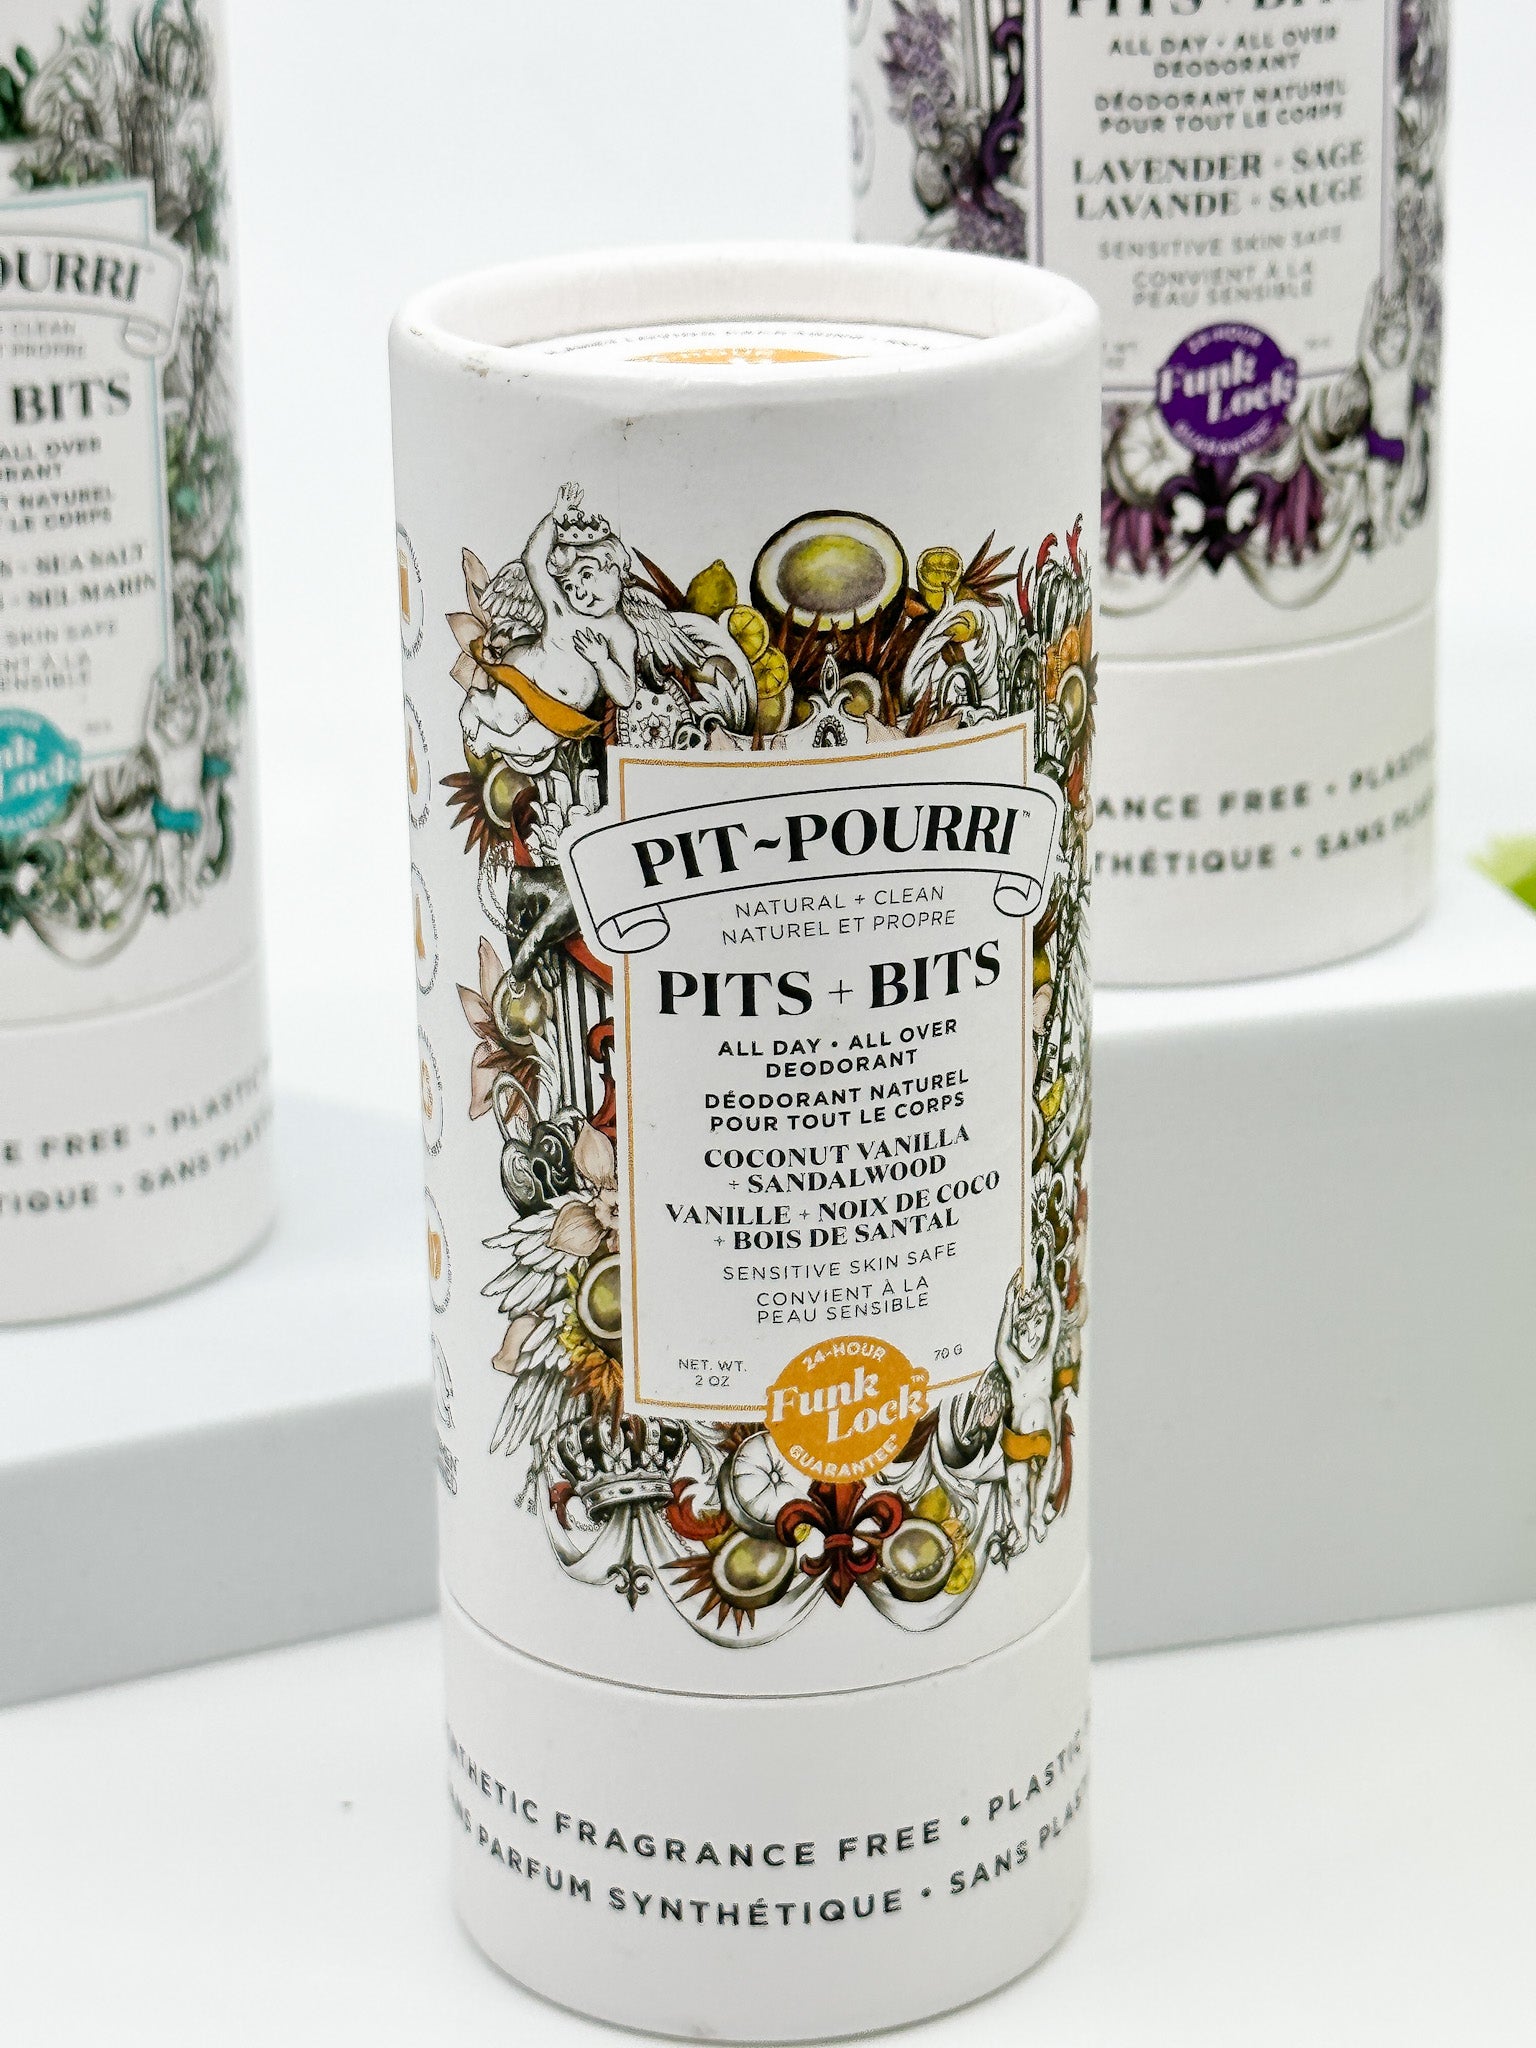 Pits + Bits All Day + All Over Deodorant (All Natural)